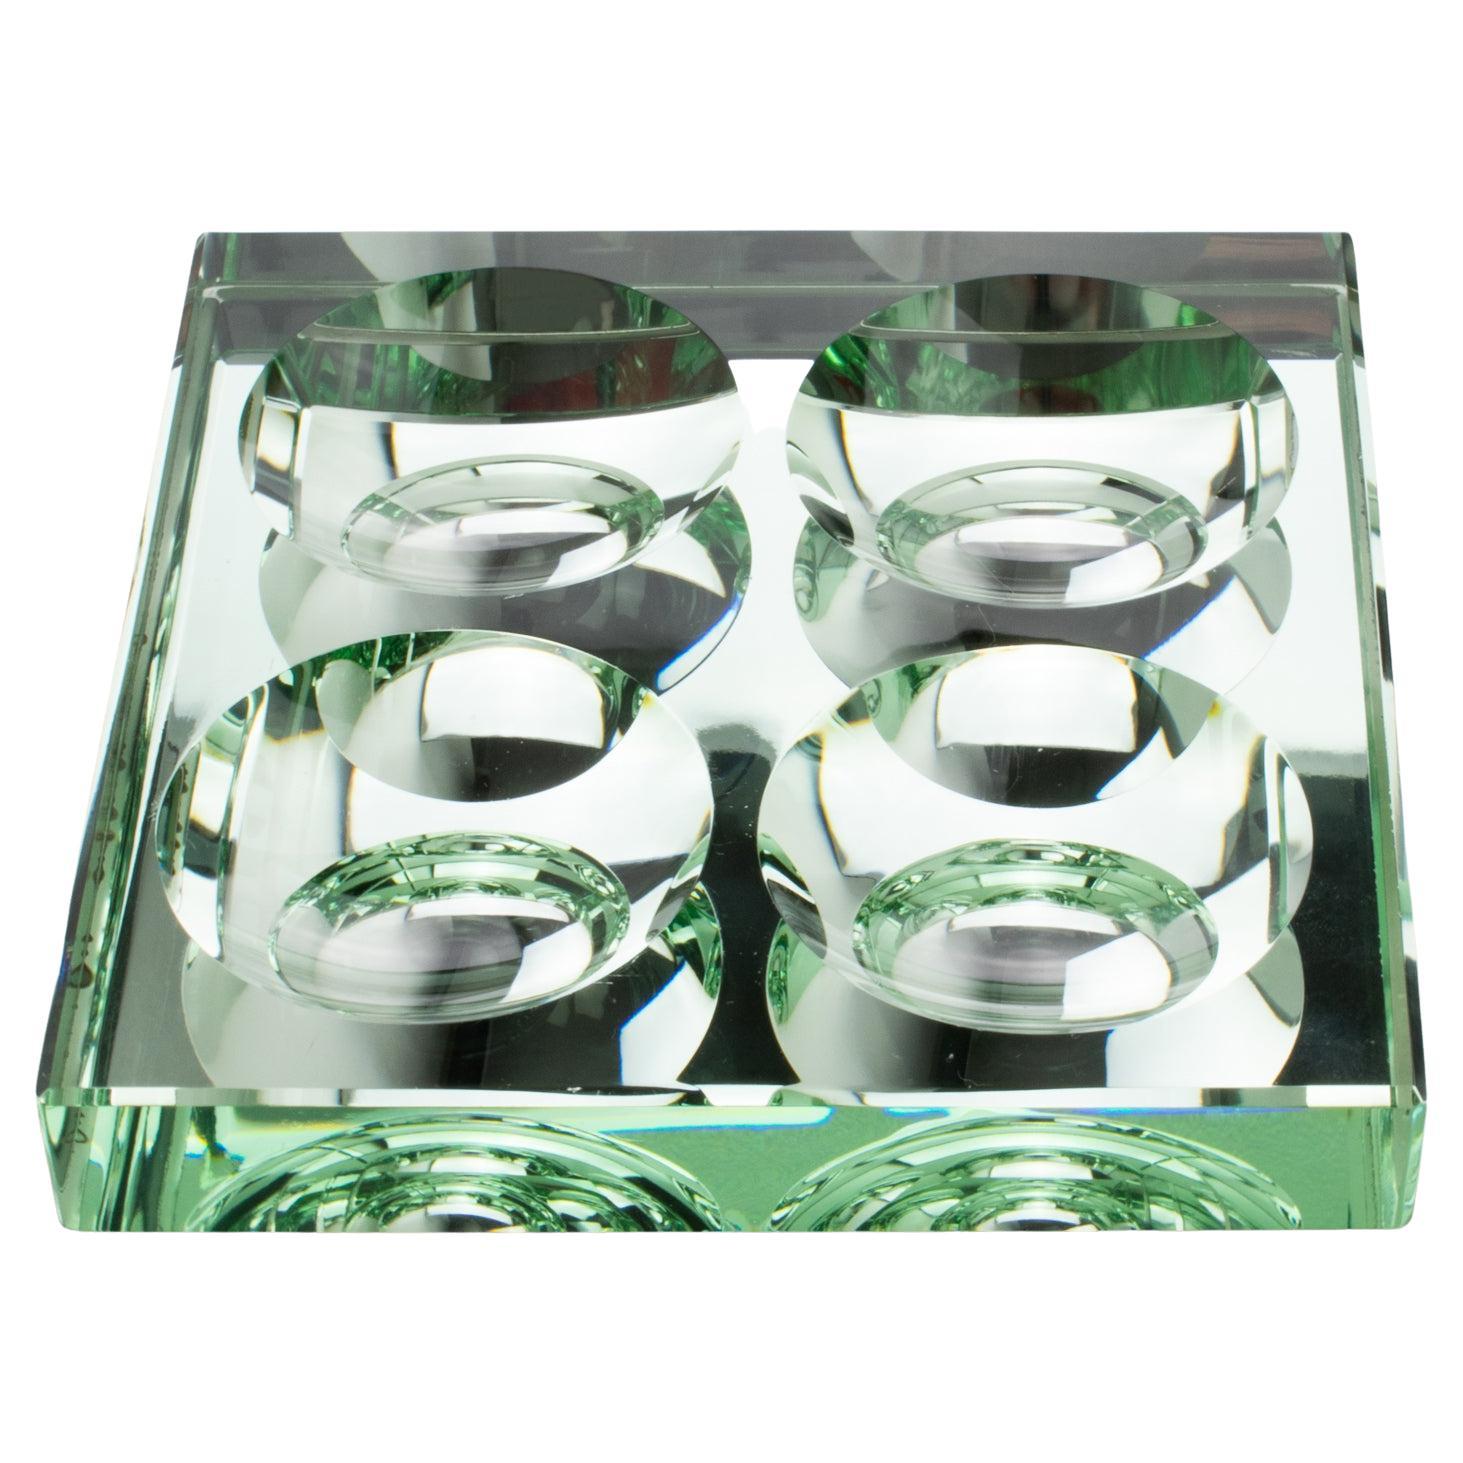 Jean Luce Art Deco Mirrored Glass Catchall Desk Tidy Centrepiece, France 1940s